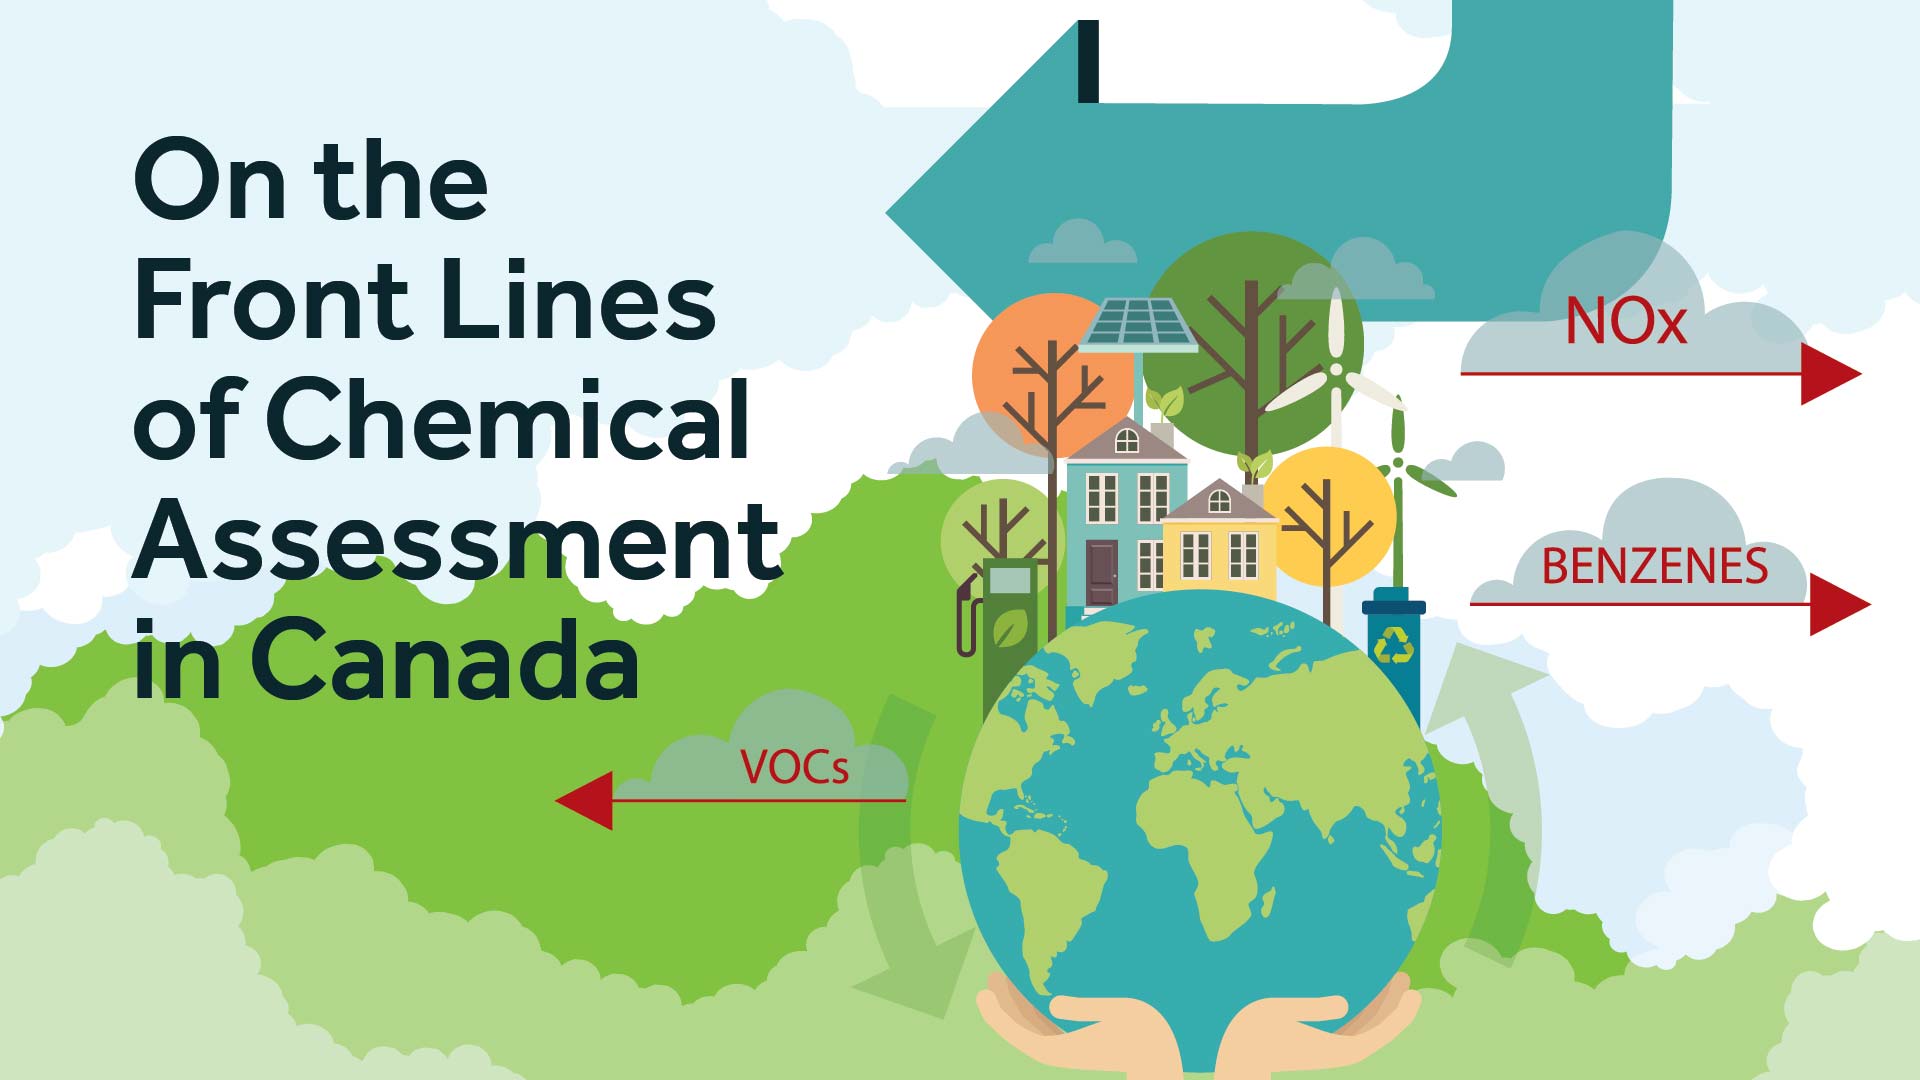 On the Front Lines of Chemical Assessment in Canada